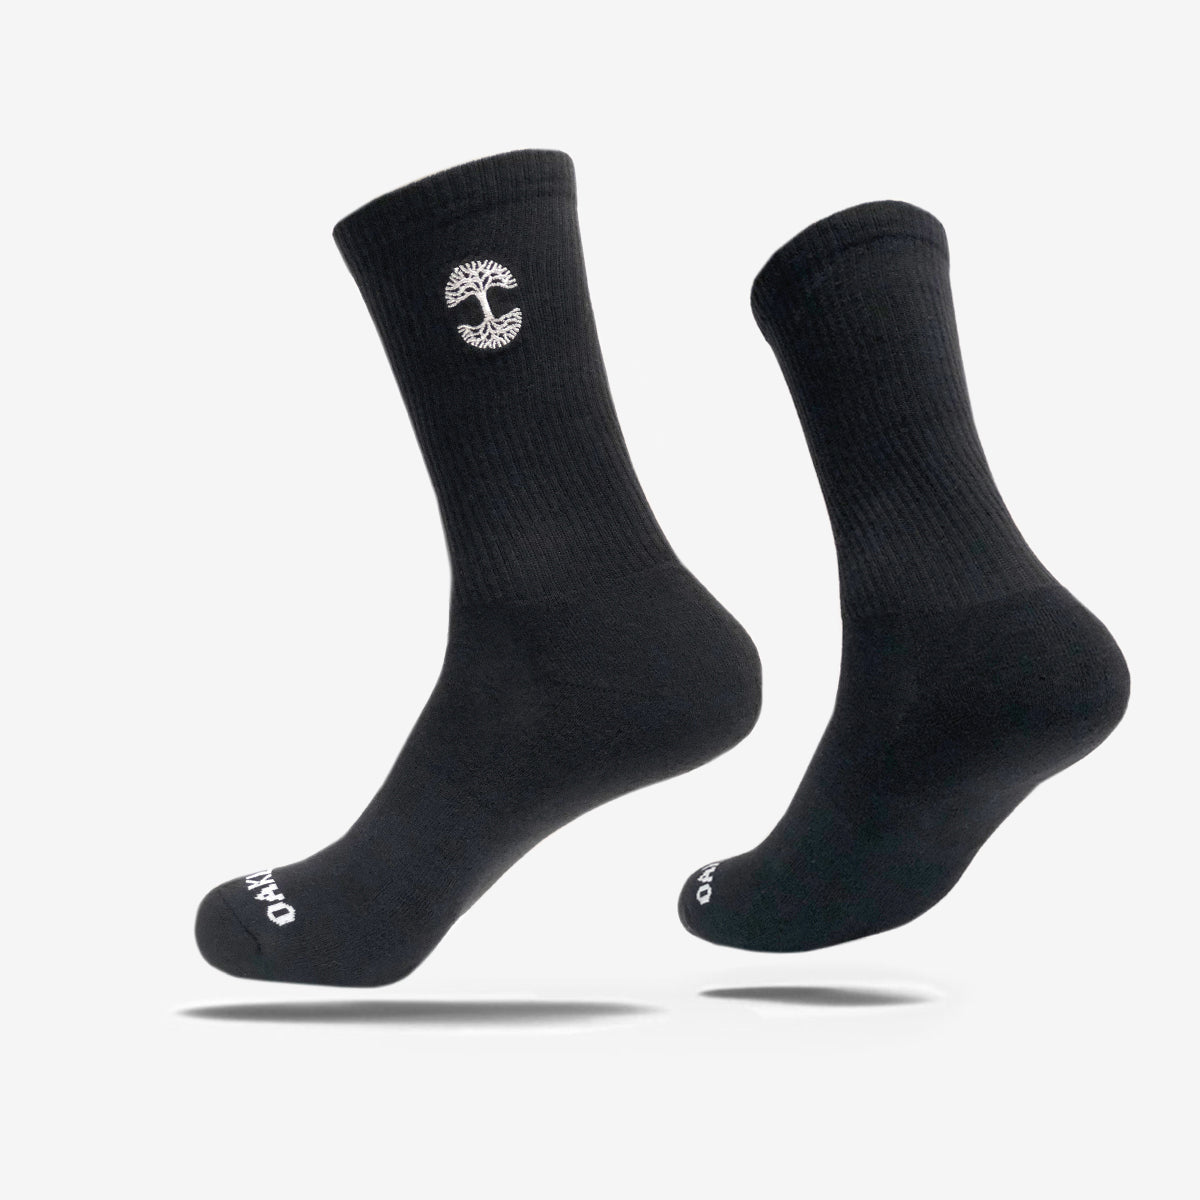 High-cut men's black crew socks with white embroidered Oaklandish logo at the top.